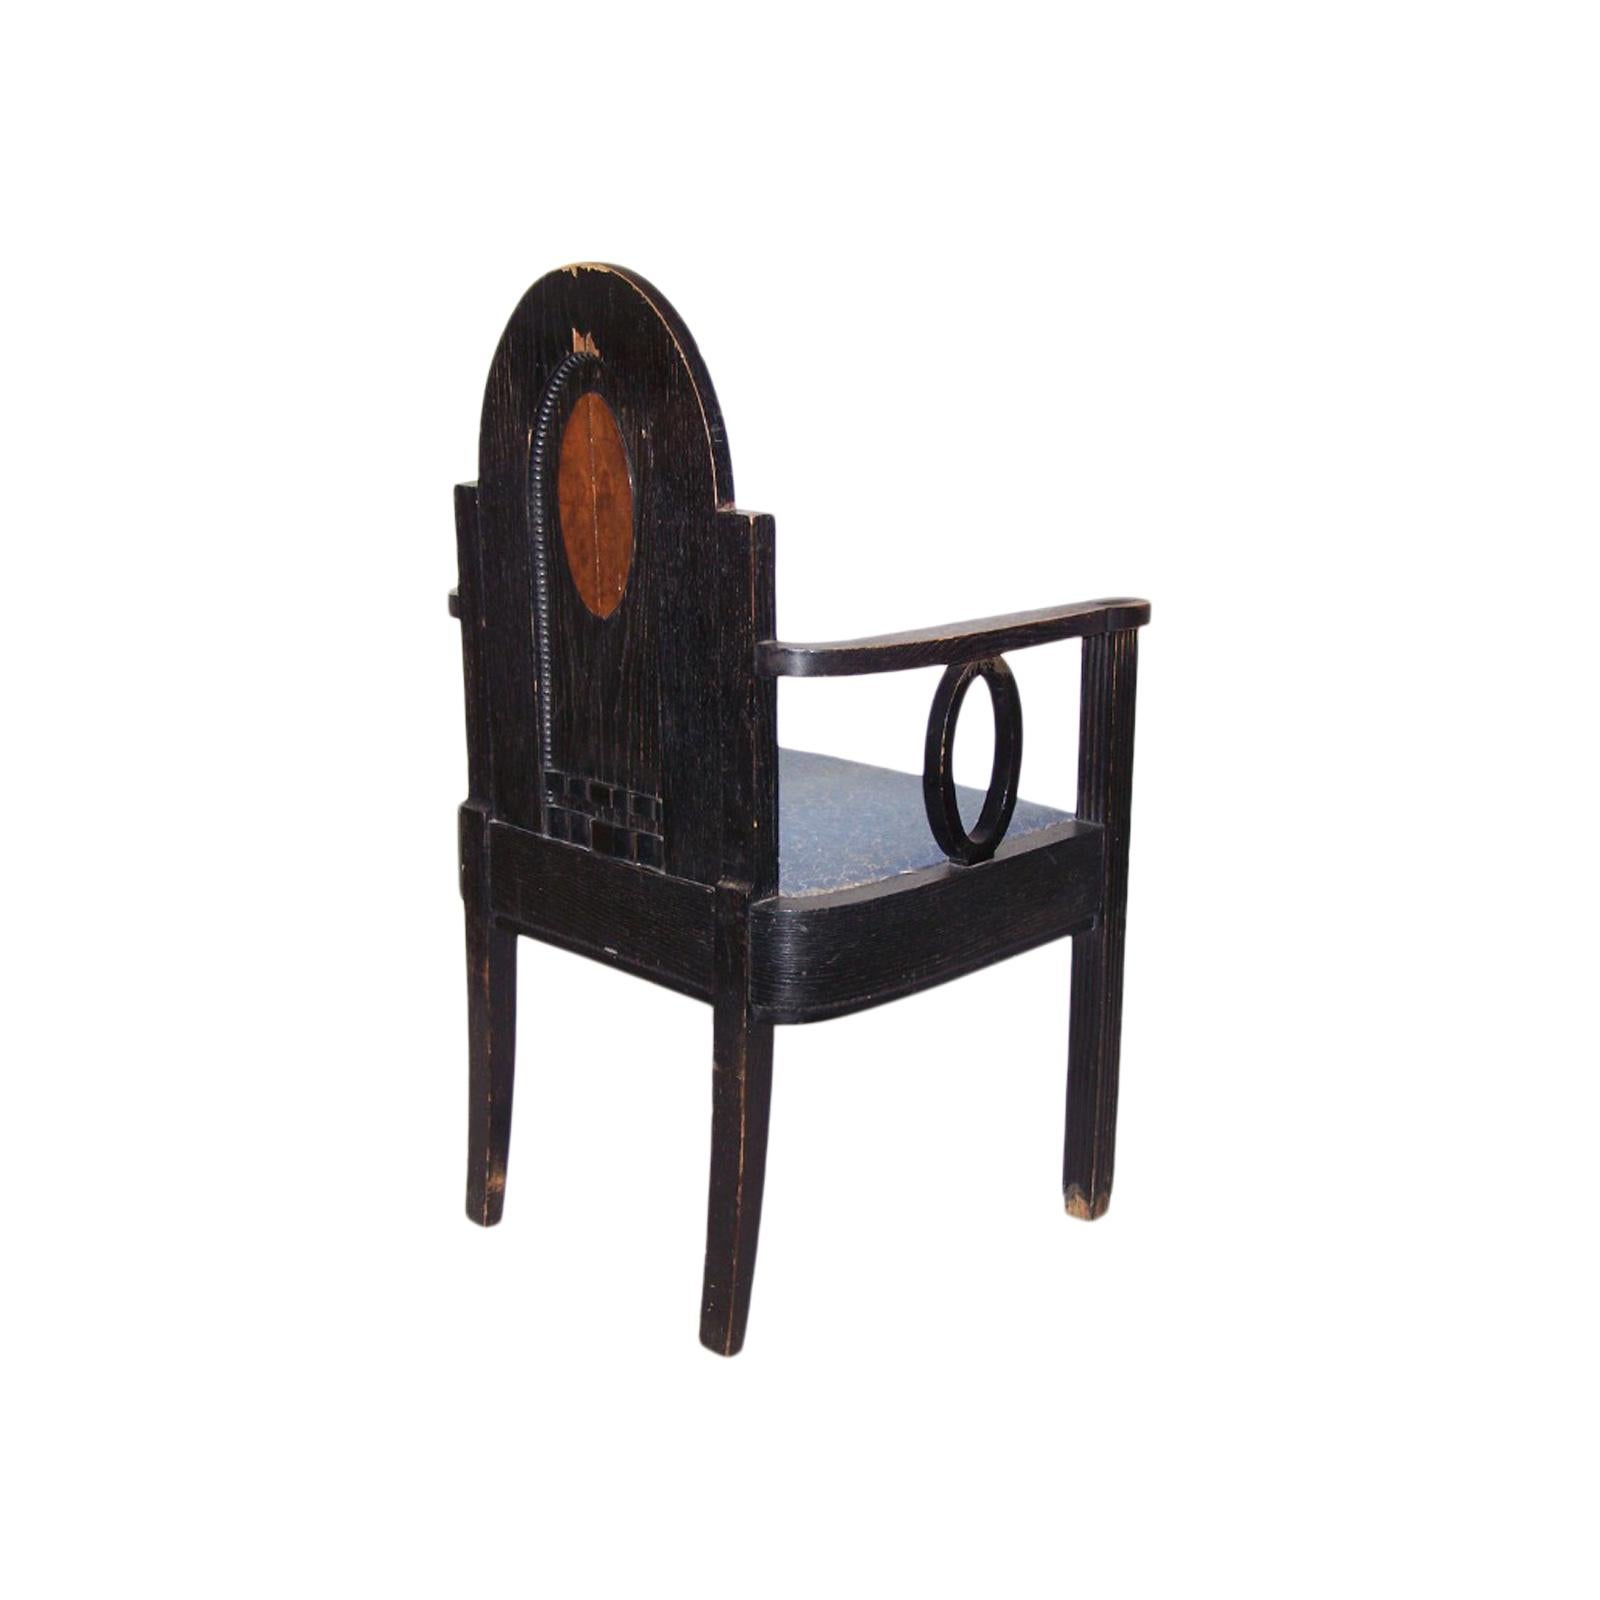 Vienna Secession Viennese Chair 1905 Jugendstil, Secession Style 1905 / Original For Sale